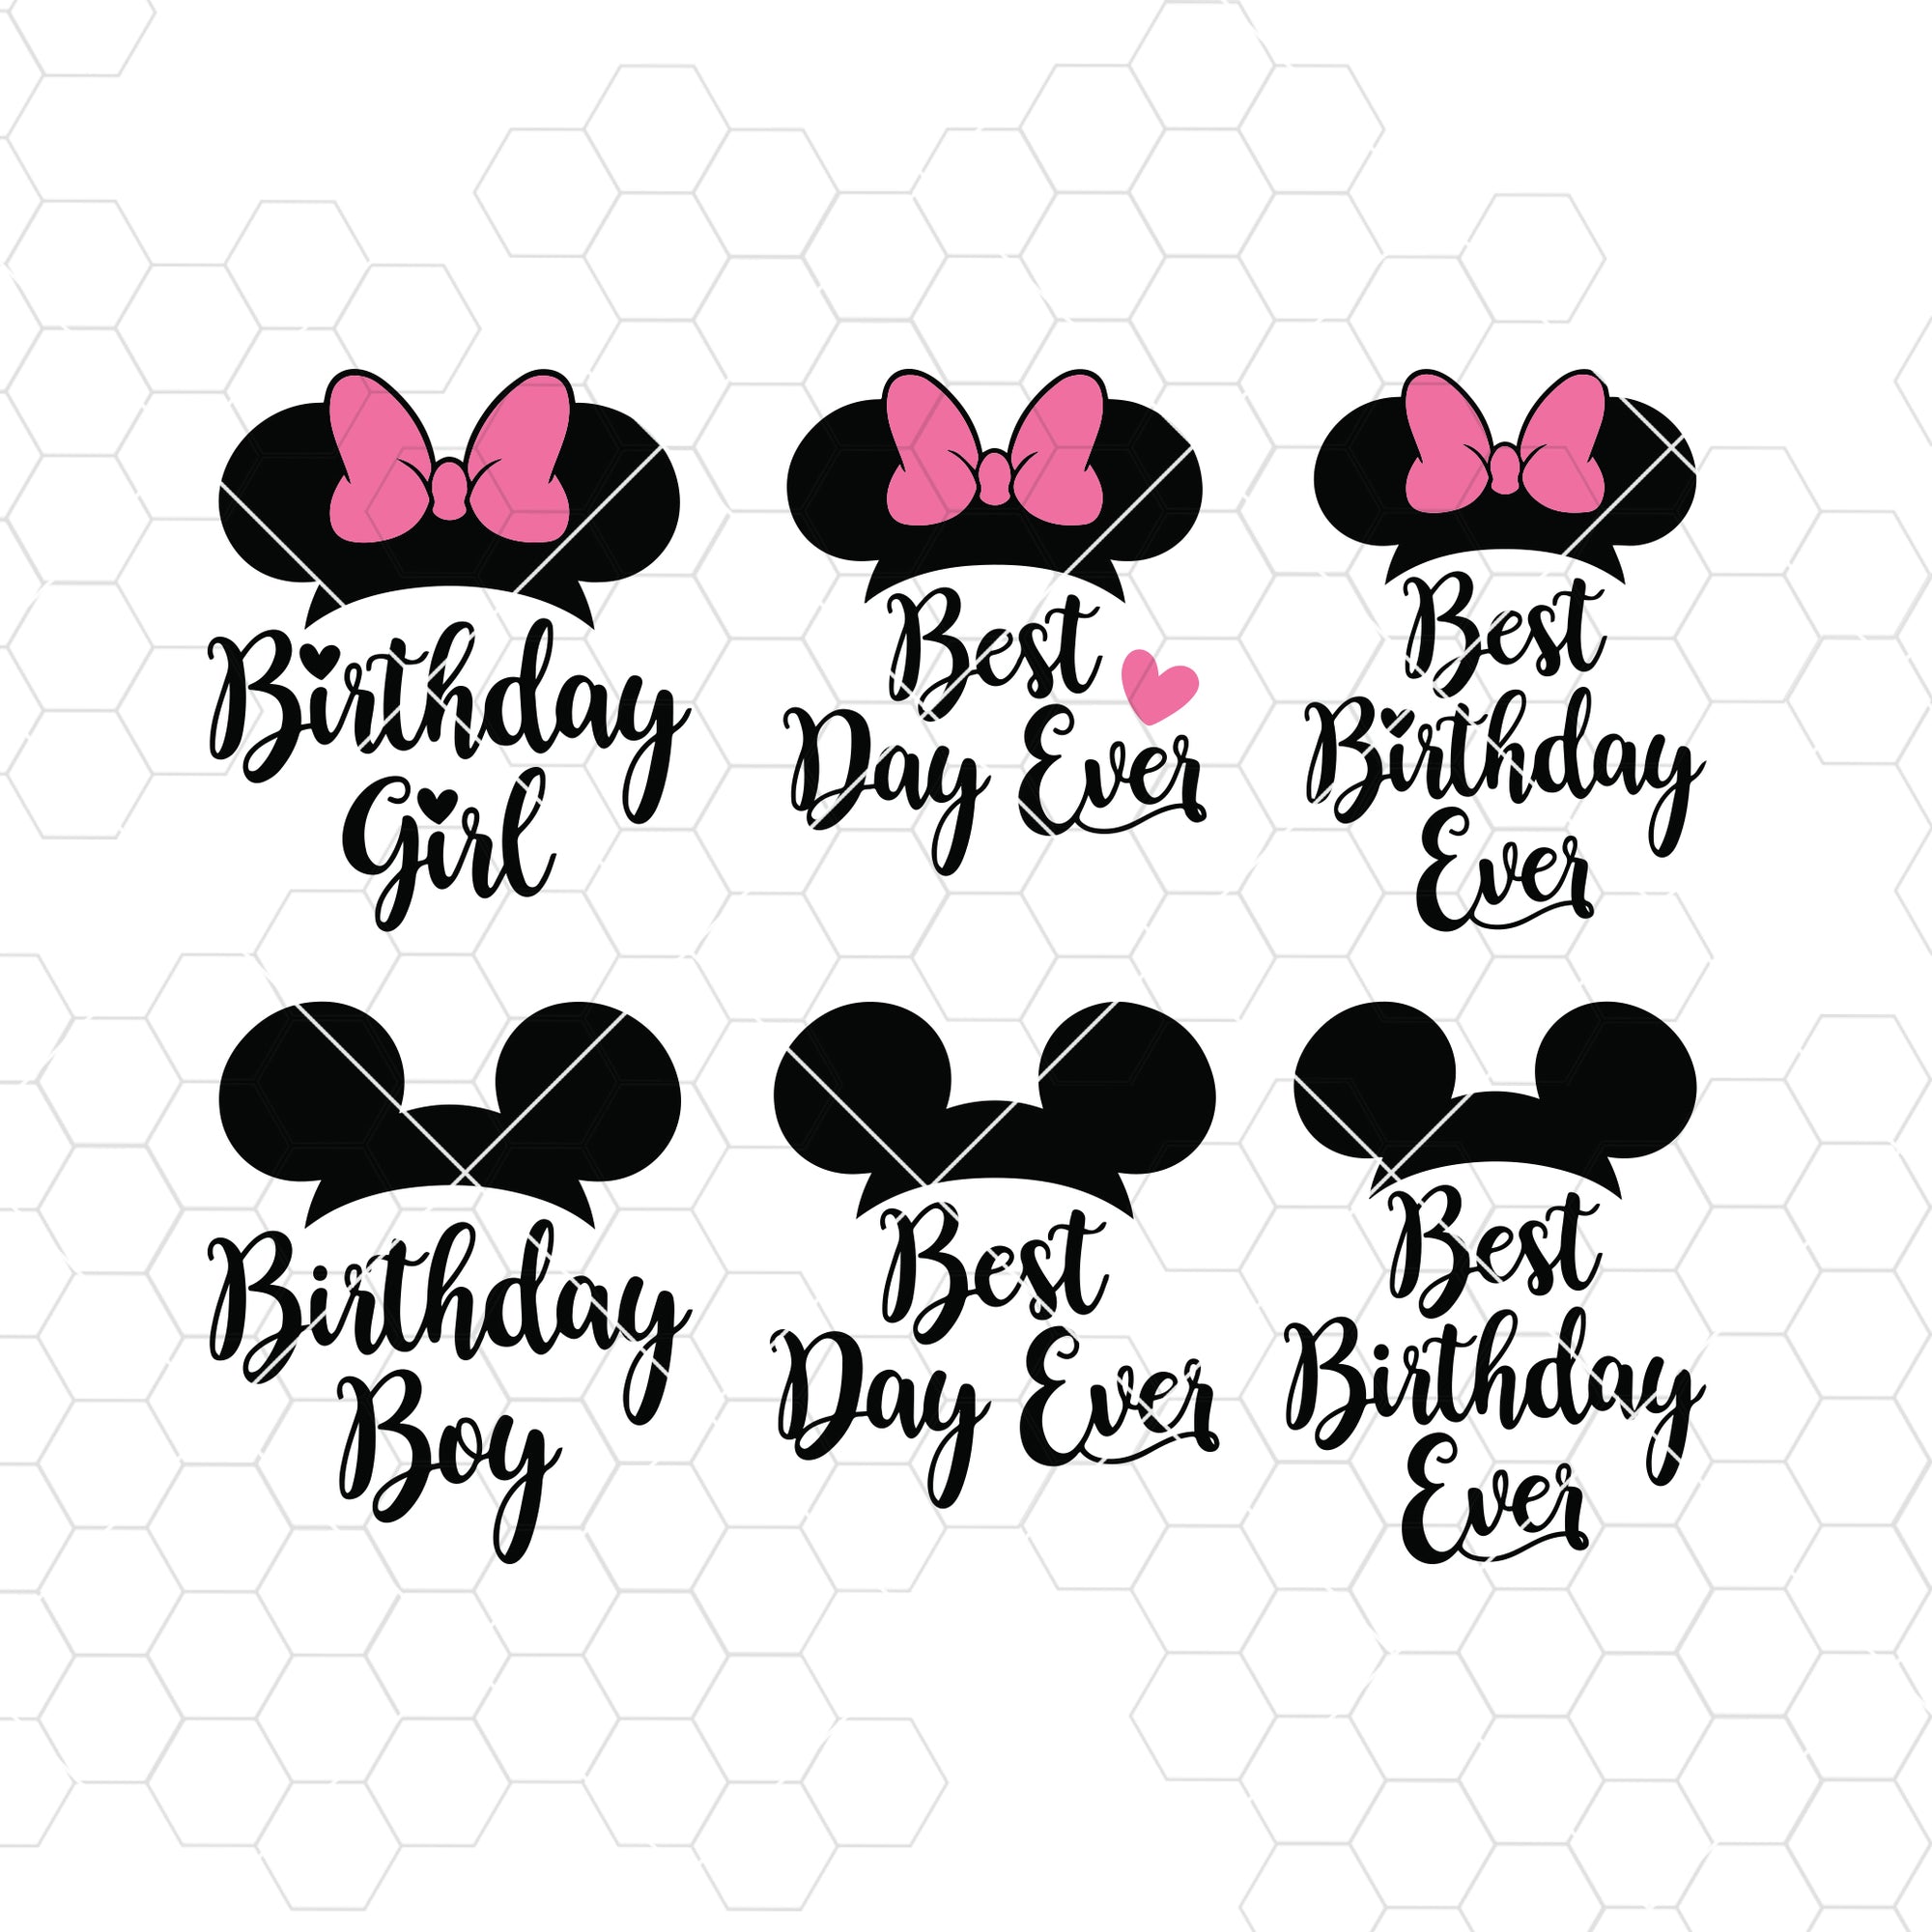 It's My Second Birthday Mickey Mouse IMAGE use as Printable Iron on  transfer clip art Mouse Ears Shirt Party T-shirt Download DIY